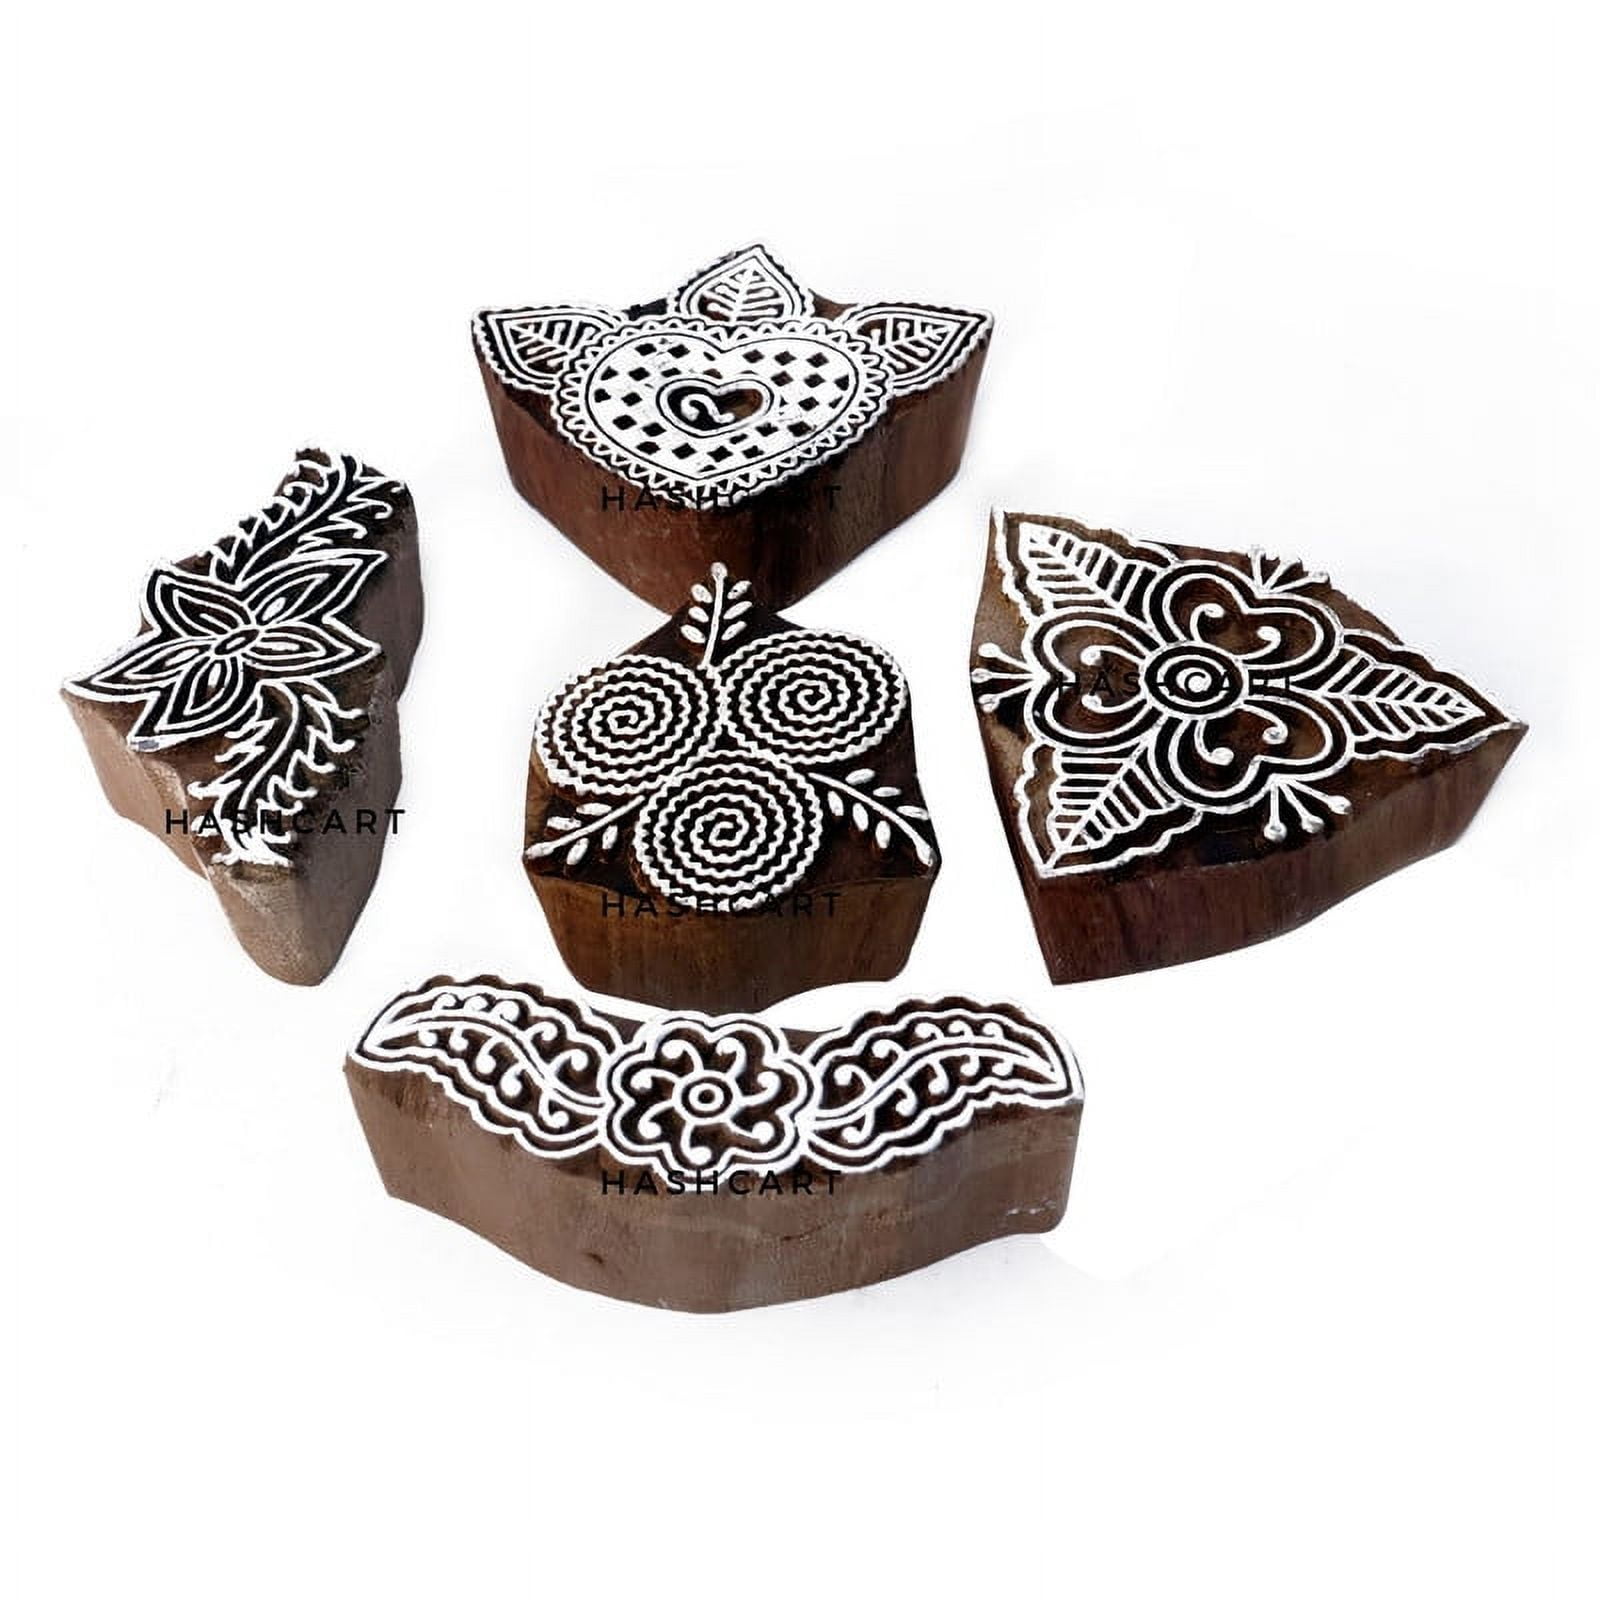 Hashcart Wooden Pottery Stamps for Block Printing Set of 5, Wooden Printing  Stamps for Crafting on Fabric, Clay & Henna Tattoo 